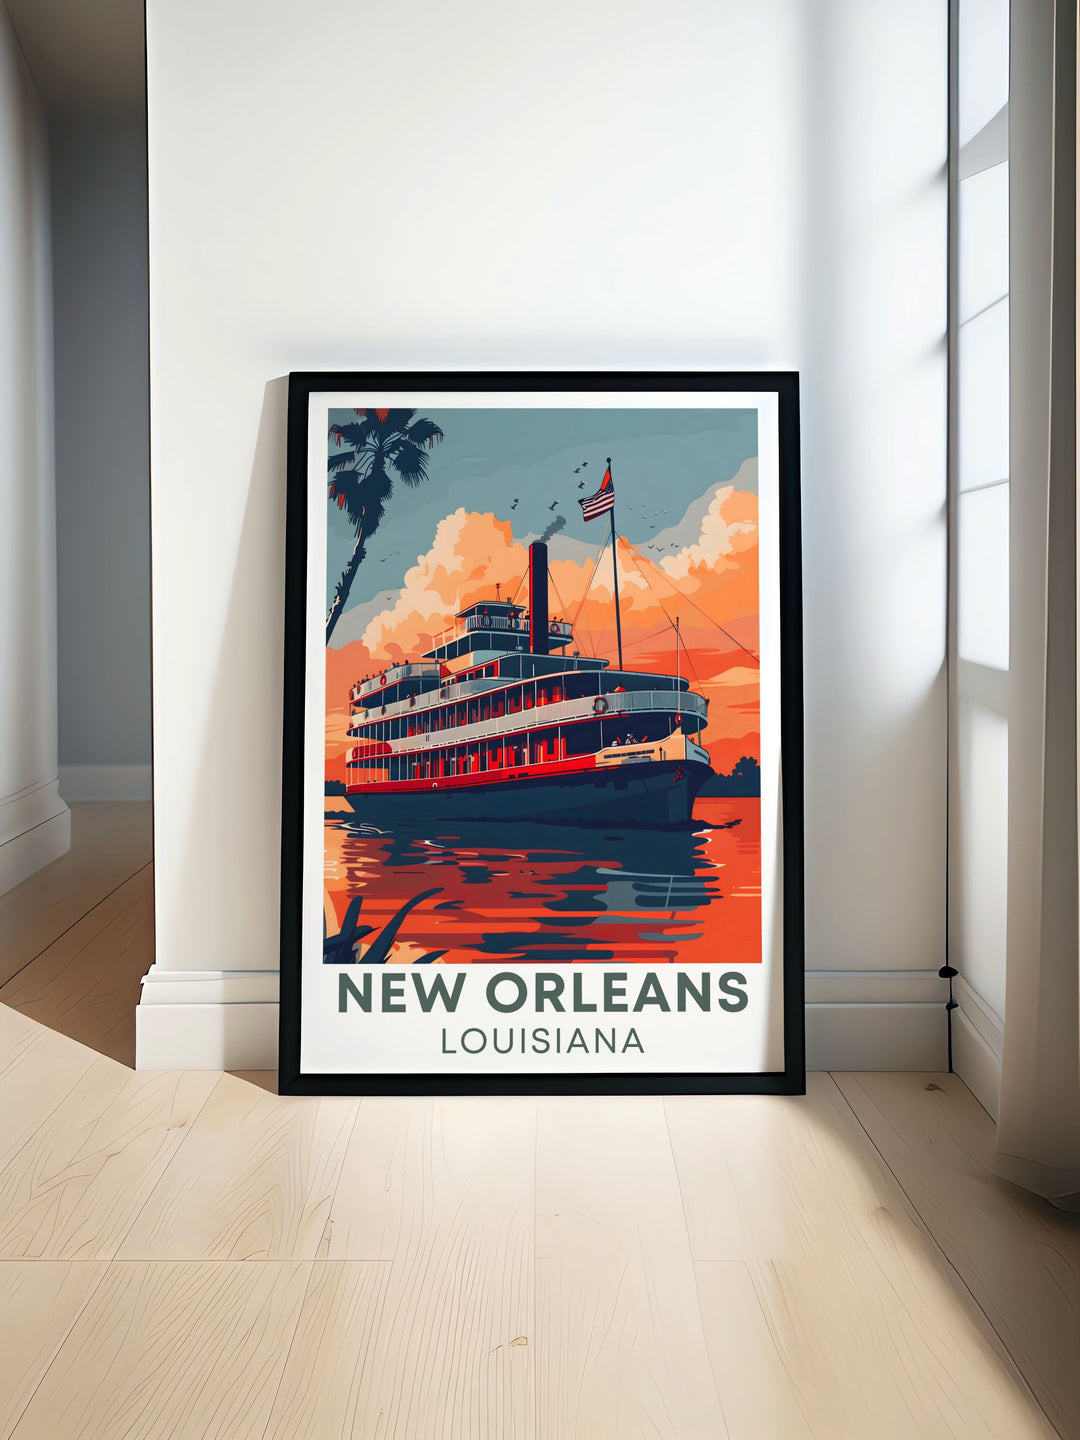 Steamboat Natchez gliding along the Mississippi River captured in a vintage New Orleans print perfect for home decor or as a travel gift showcasing the rich history and charm of Louisiana with intricate details and vibrant colors